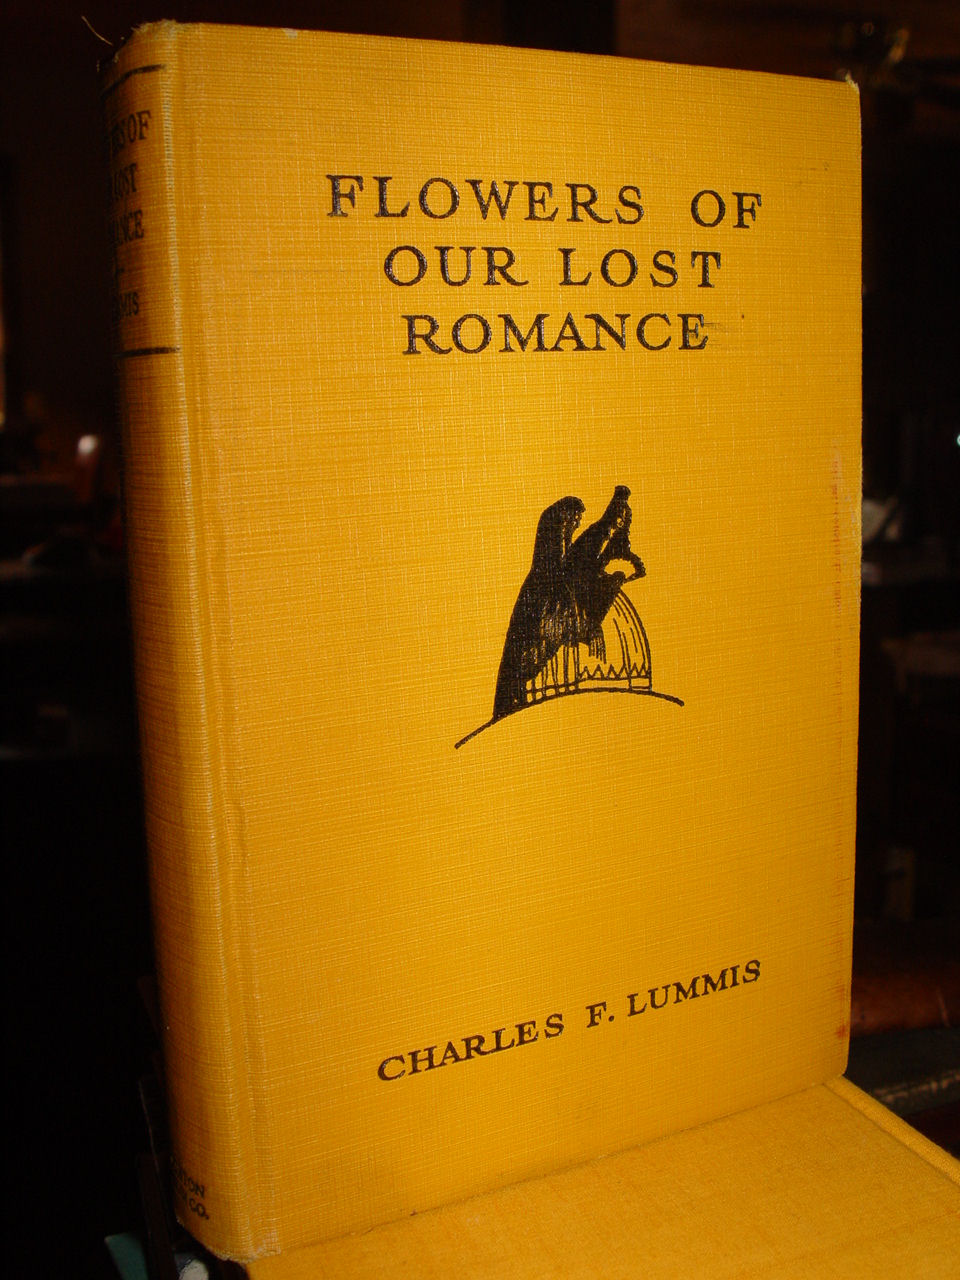 Flowers Of Our Lost Romance 1929 by Charles
                        F. Lummis